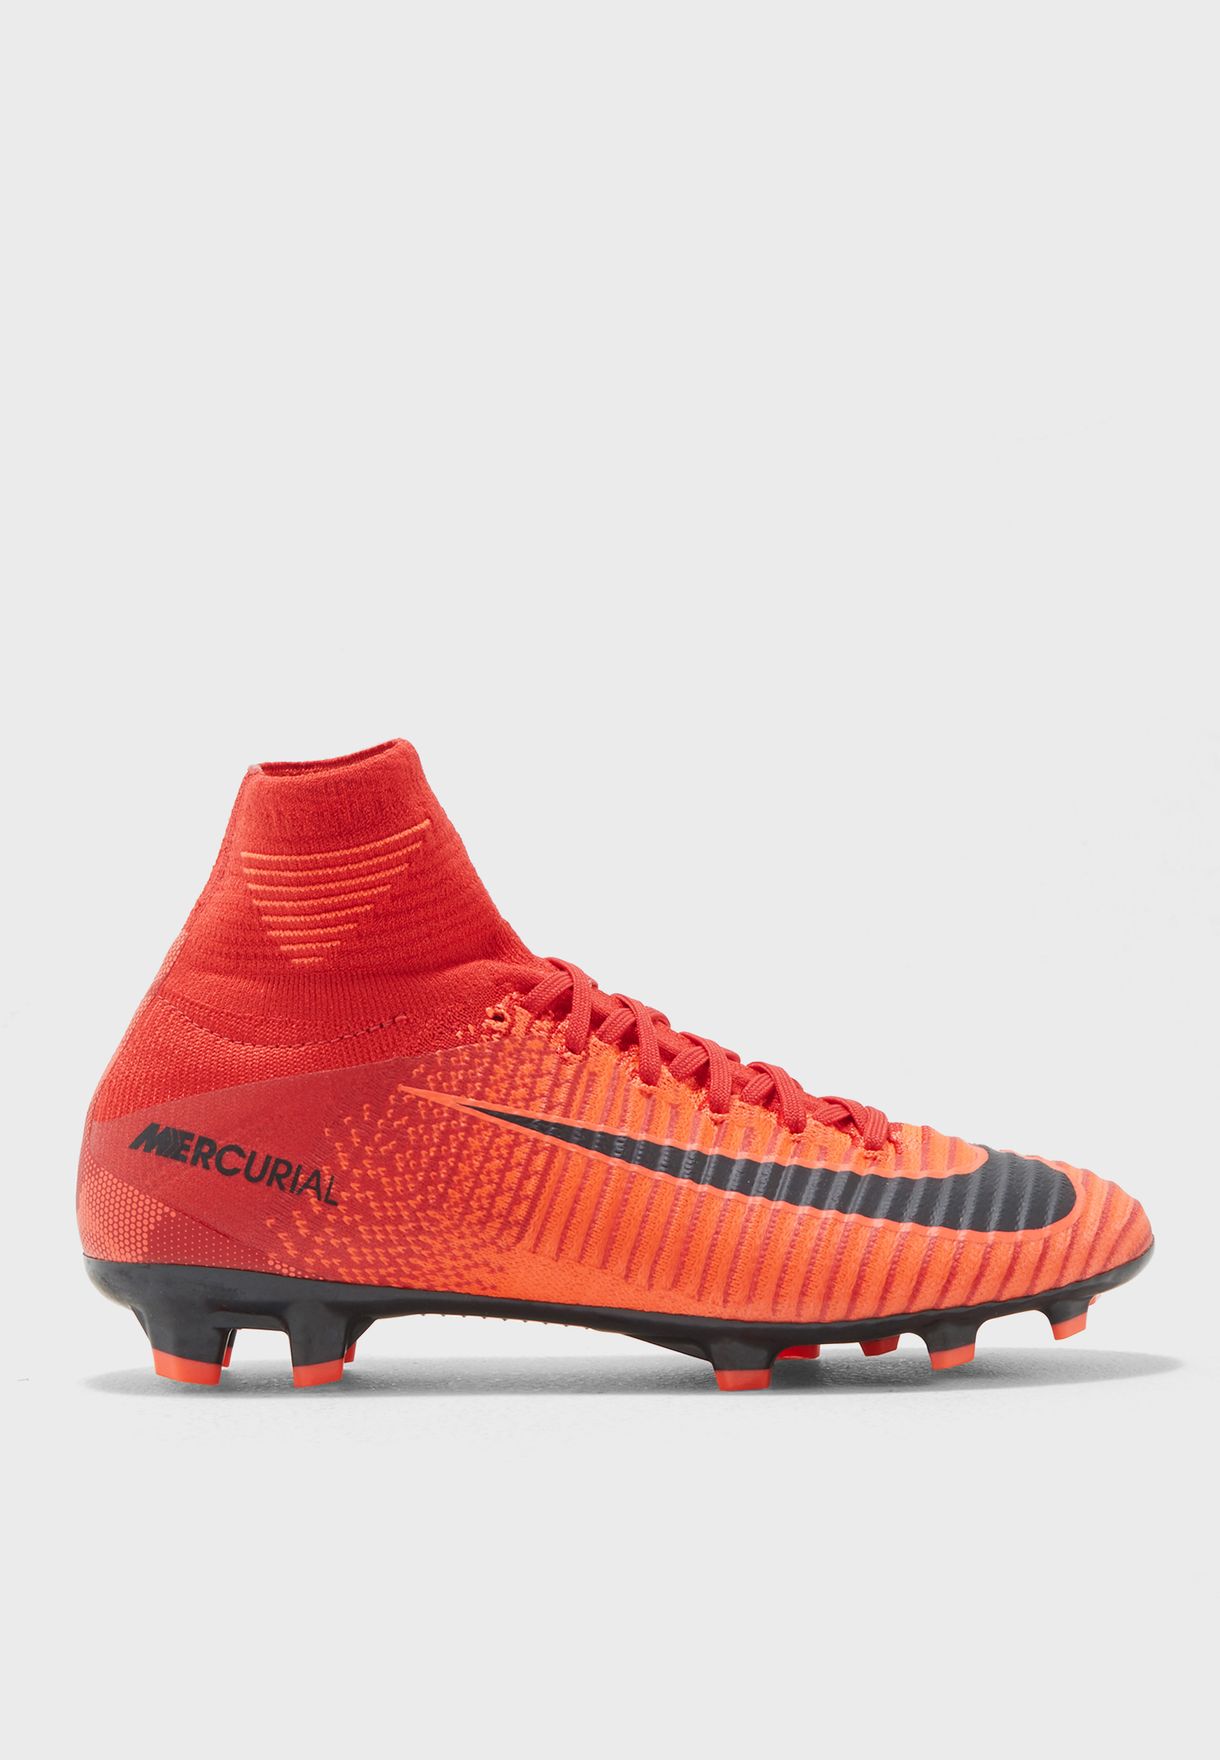 WHAT'S THE DIFFERENCE Nike Mercurial Superfly 7 vs